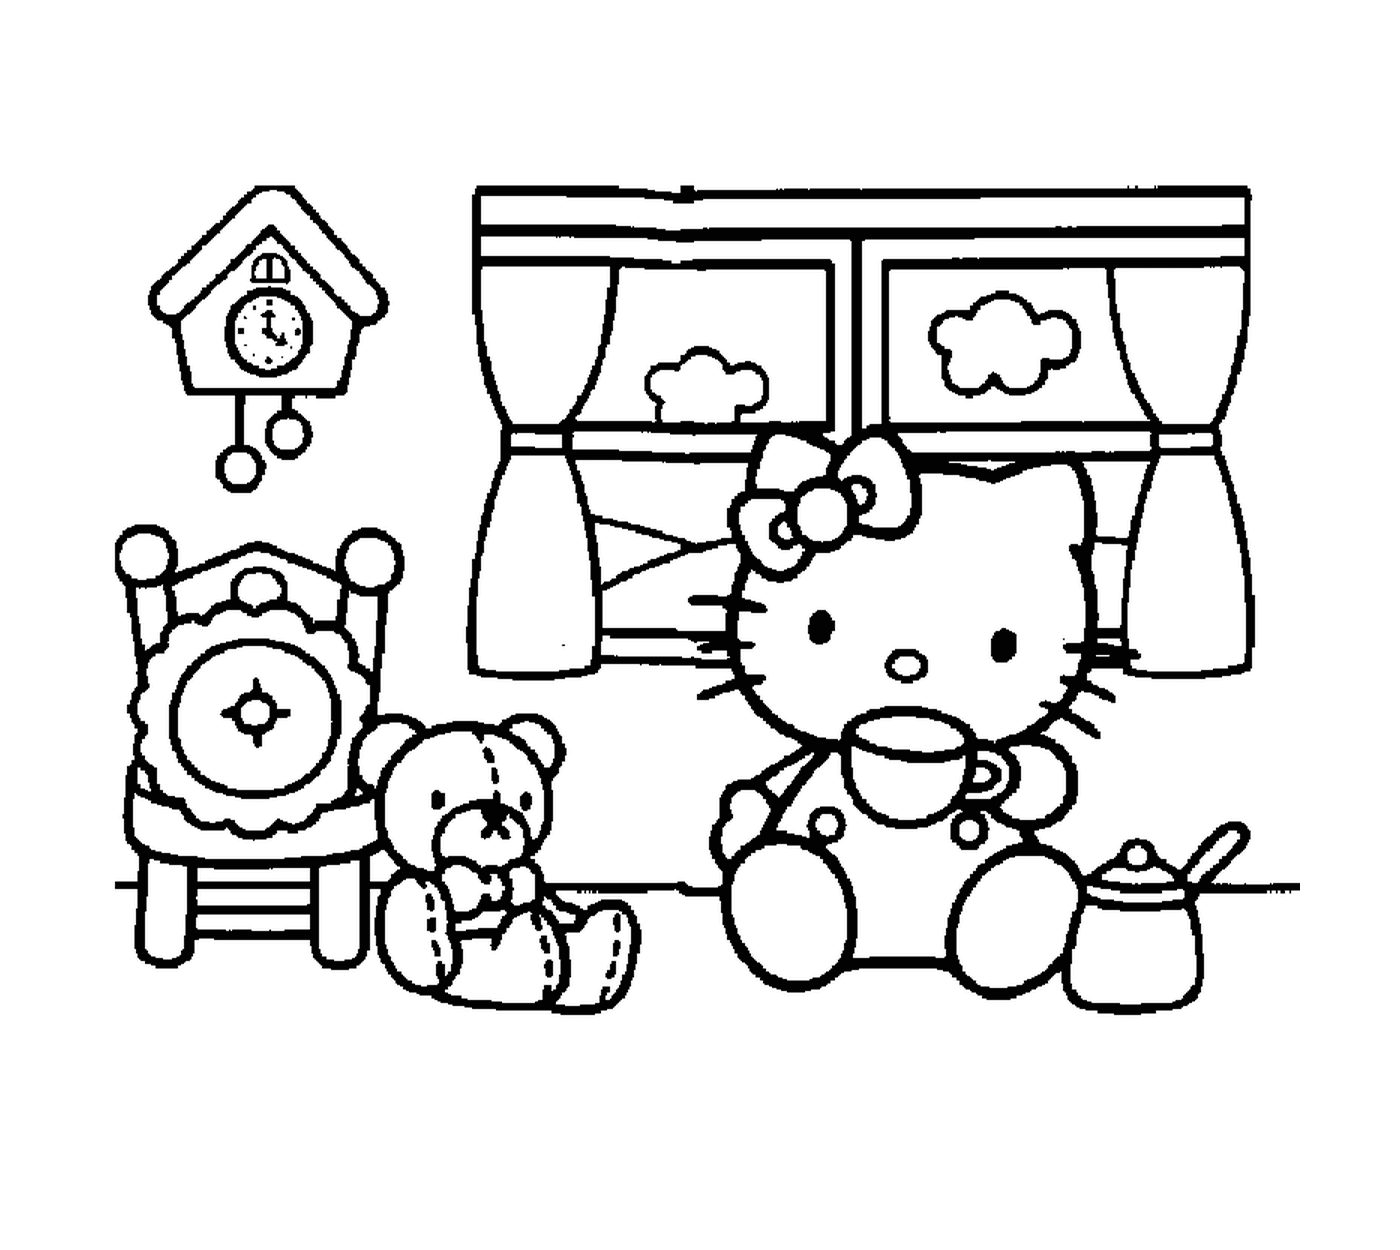  Hello Kitty sitting in front of a teddy bear 